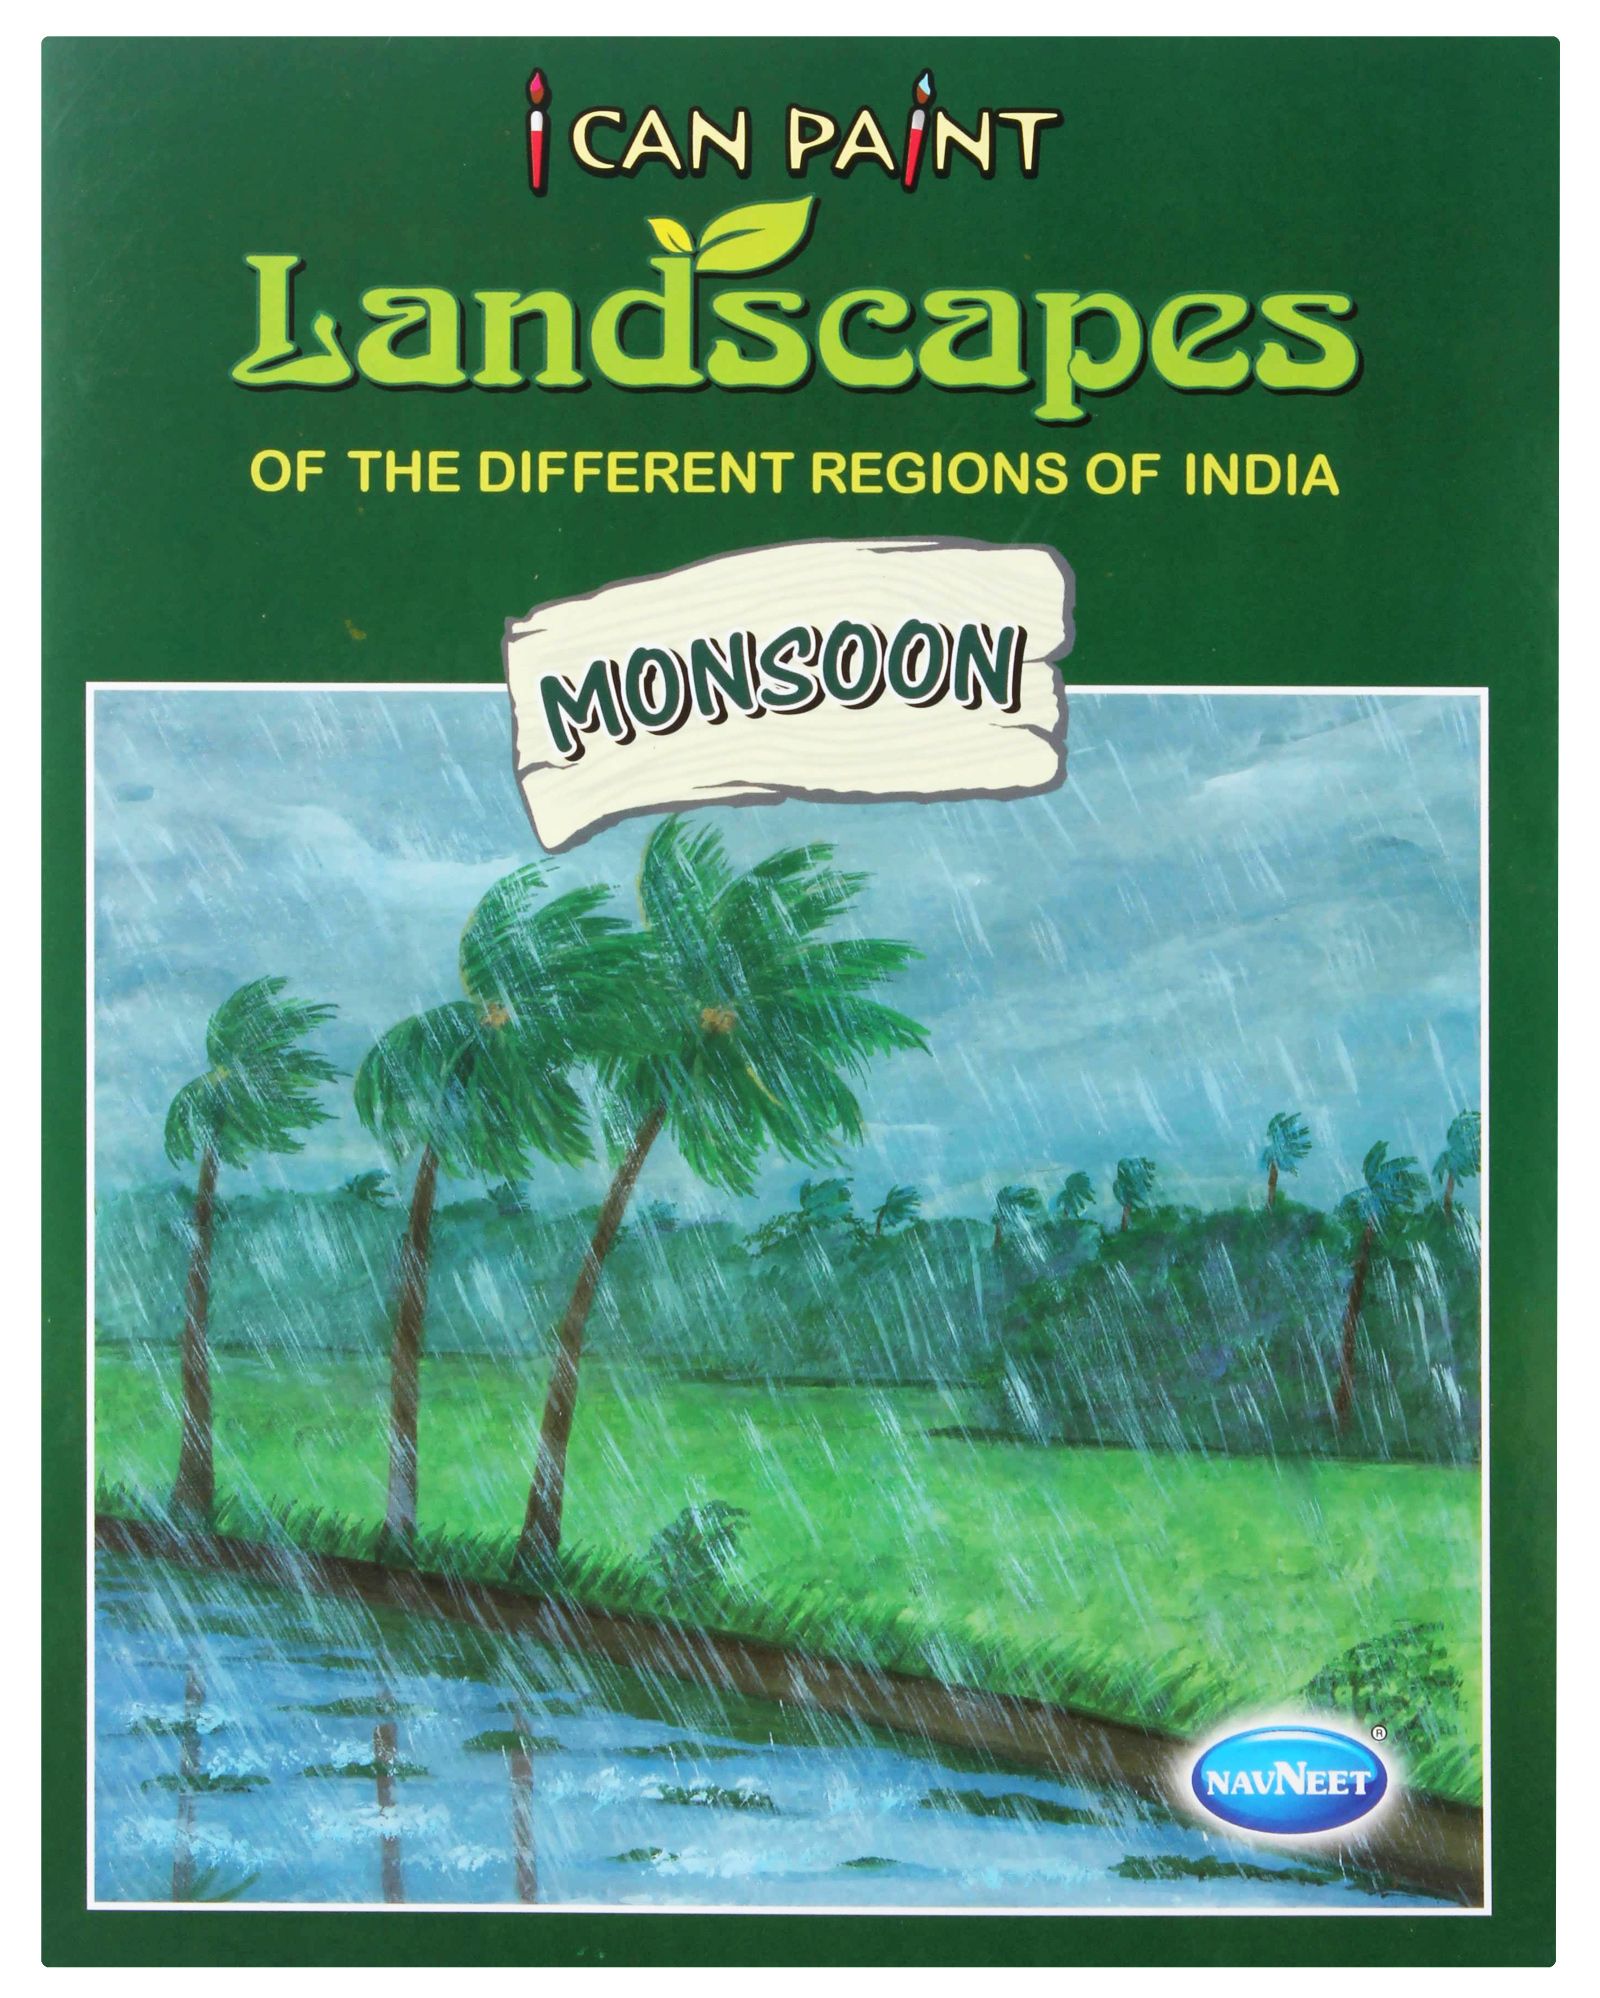 NavNeet - I Can Paint Landscapes Monsoon